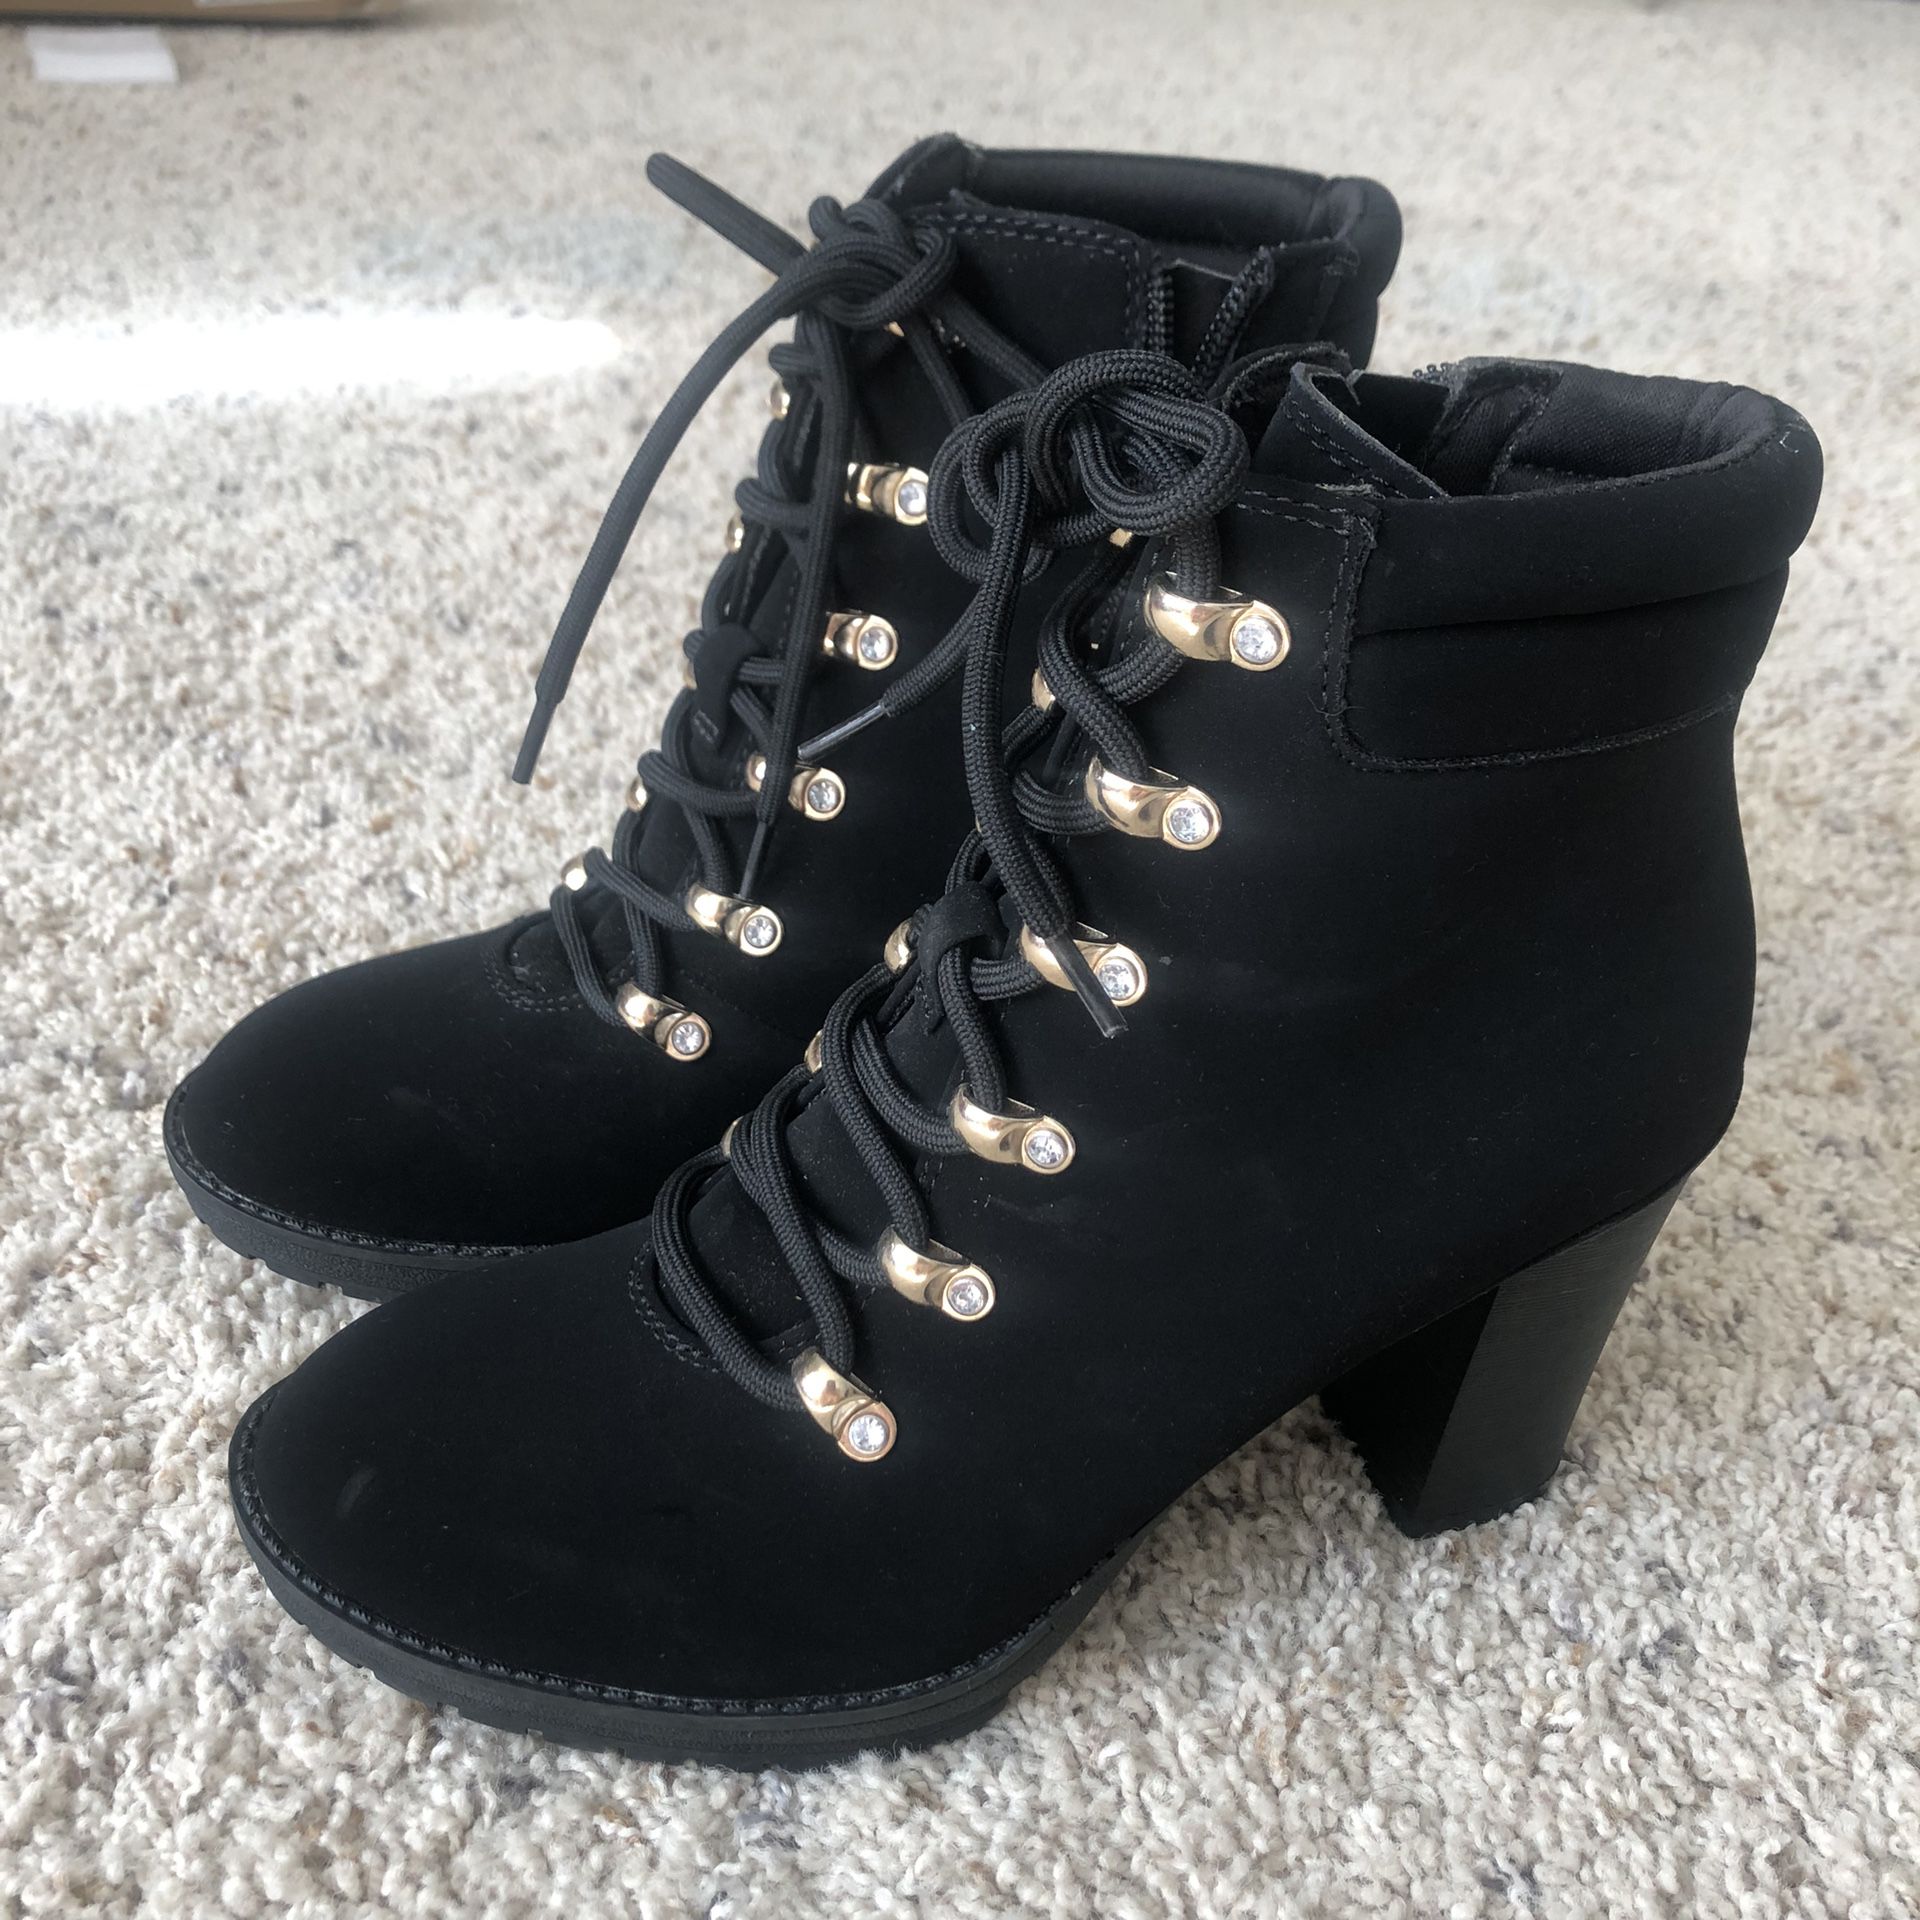 New Black Suede Ankle Booties 7